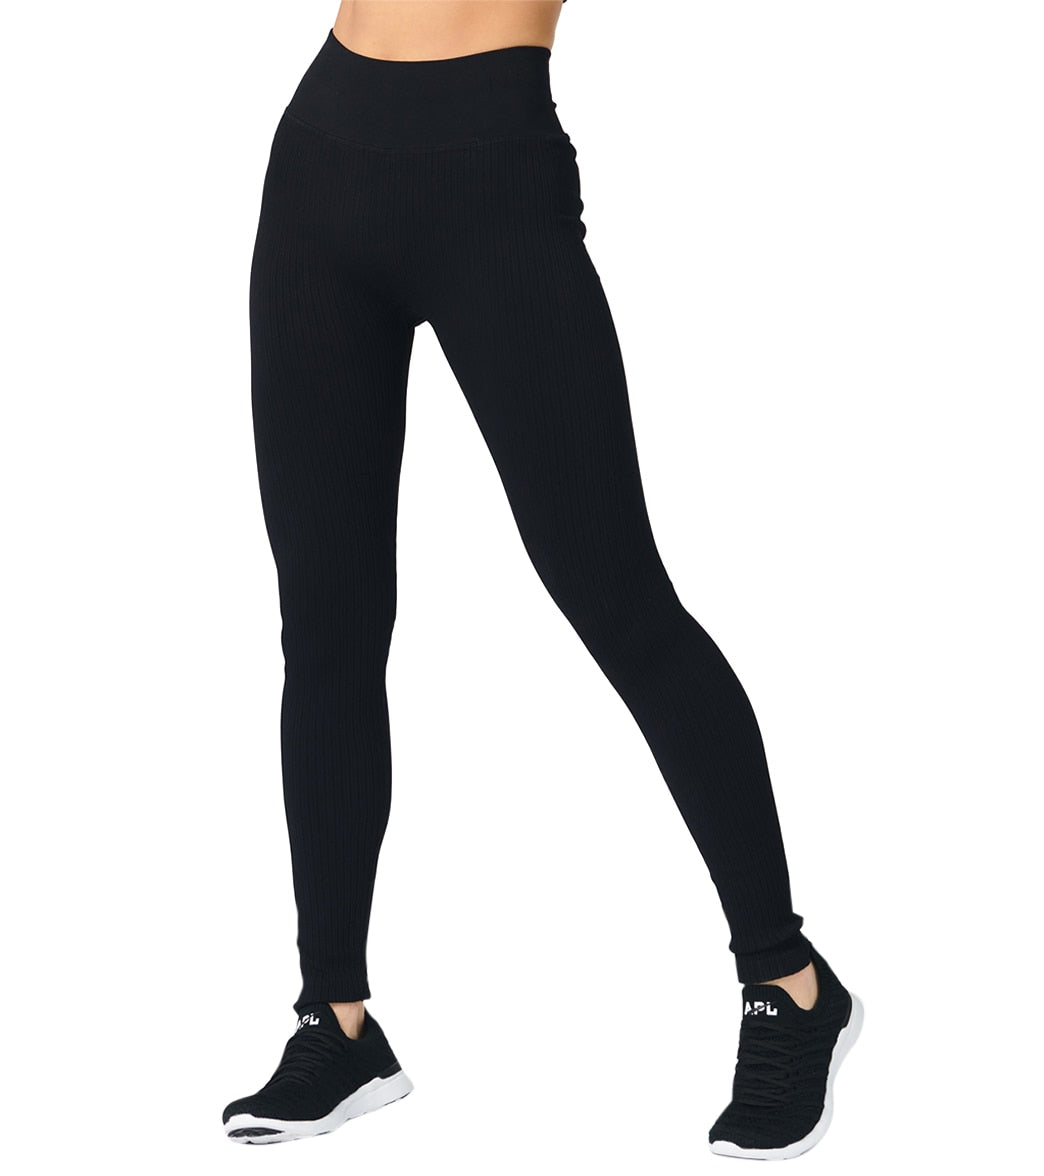 NUX 3x2 Yoga Leggings at YogaOutlet.com - Free Shipping –